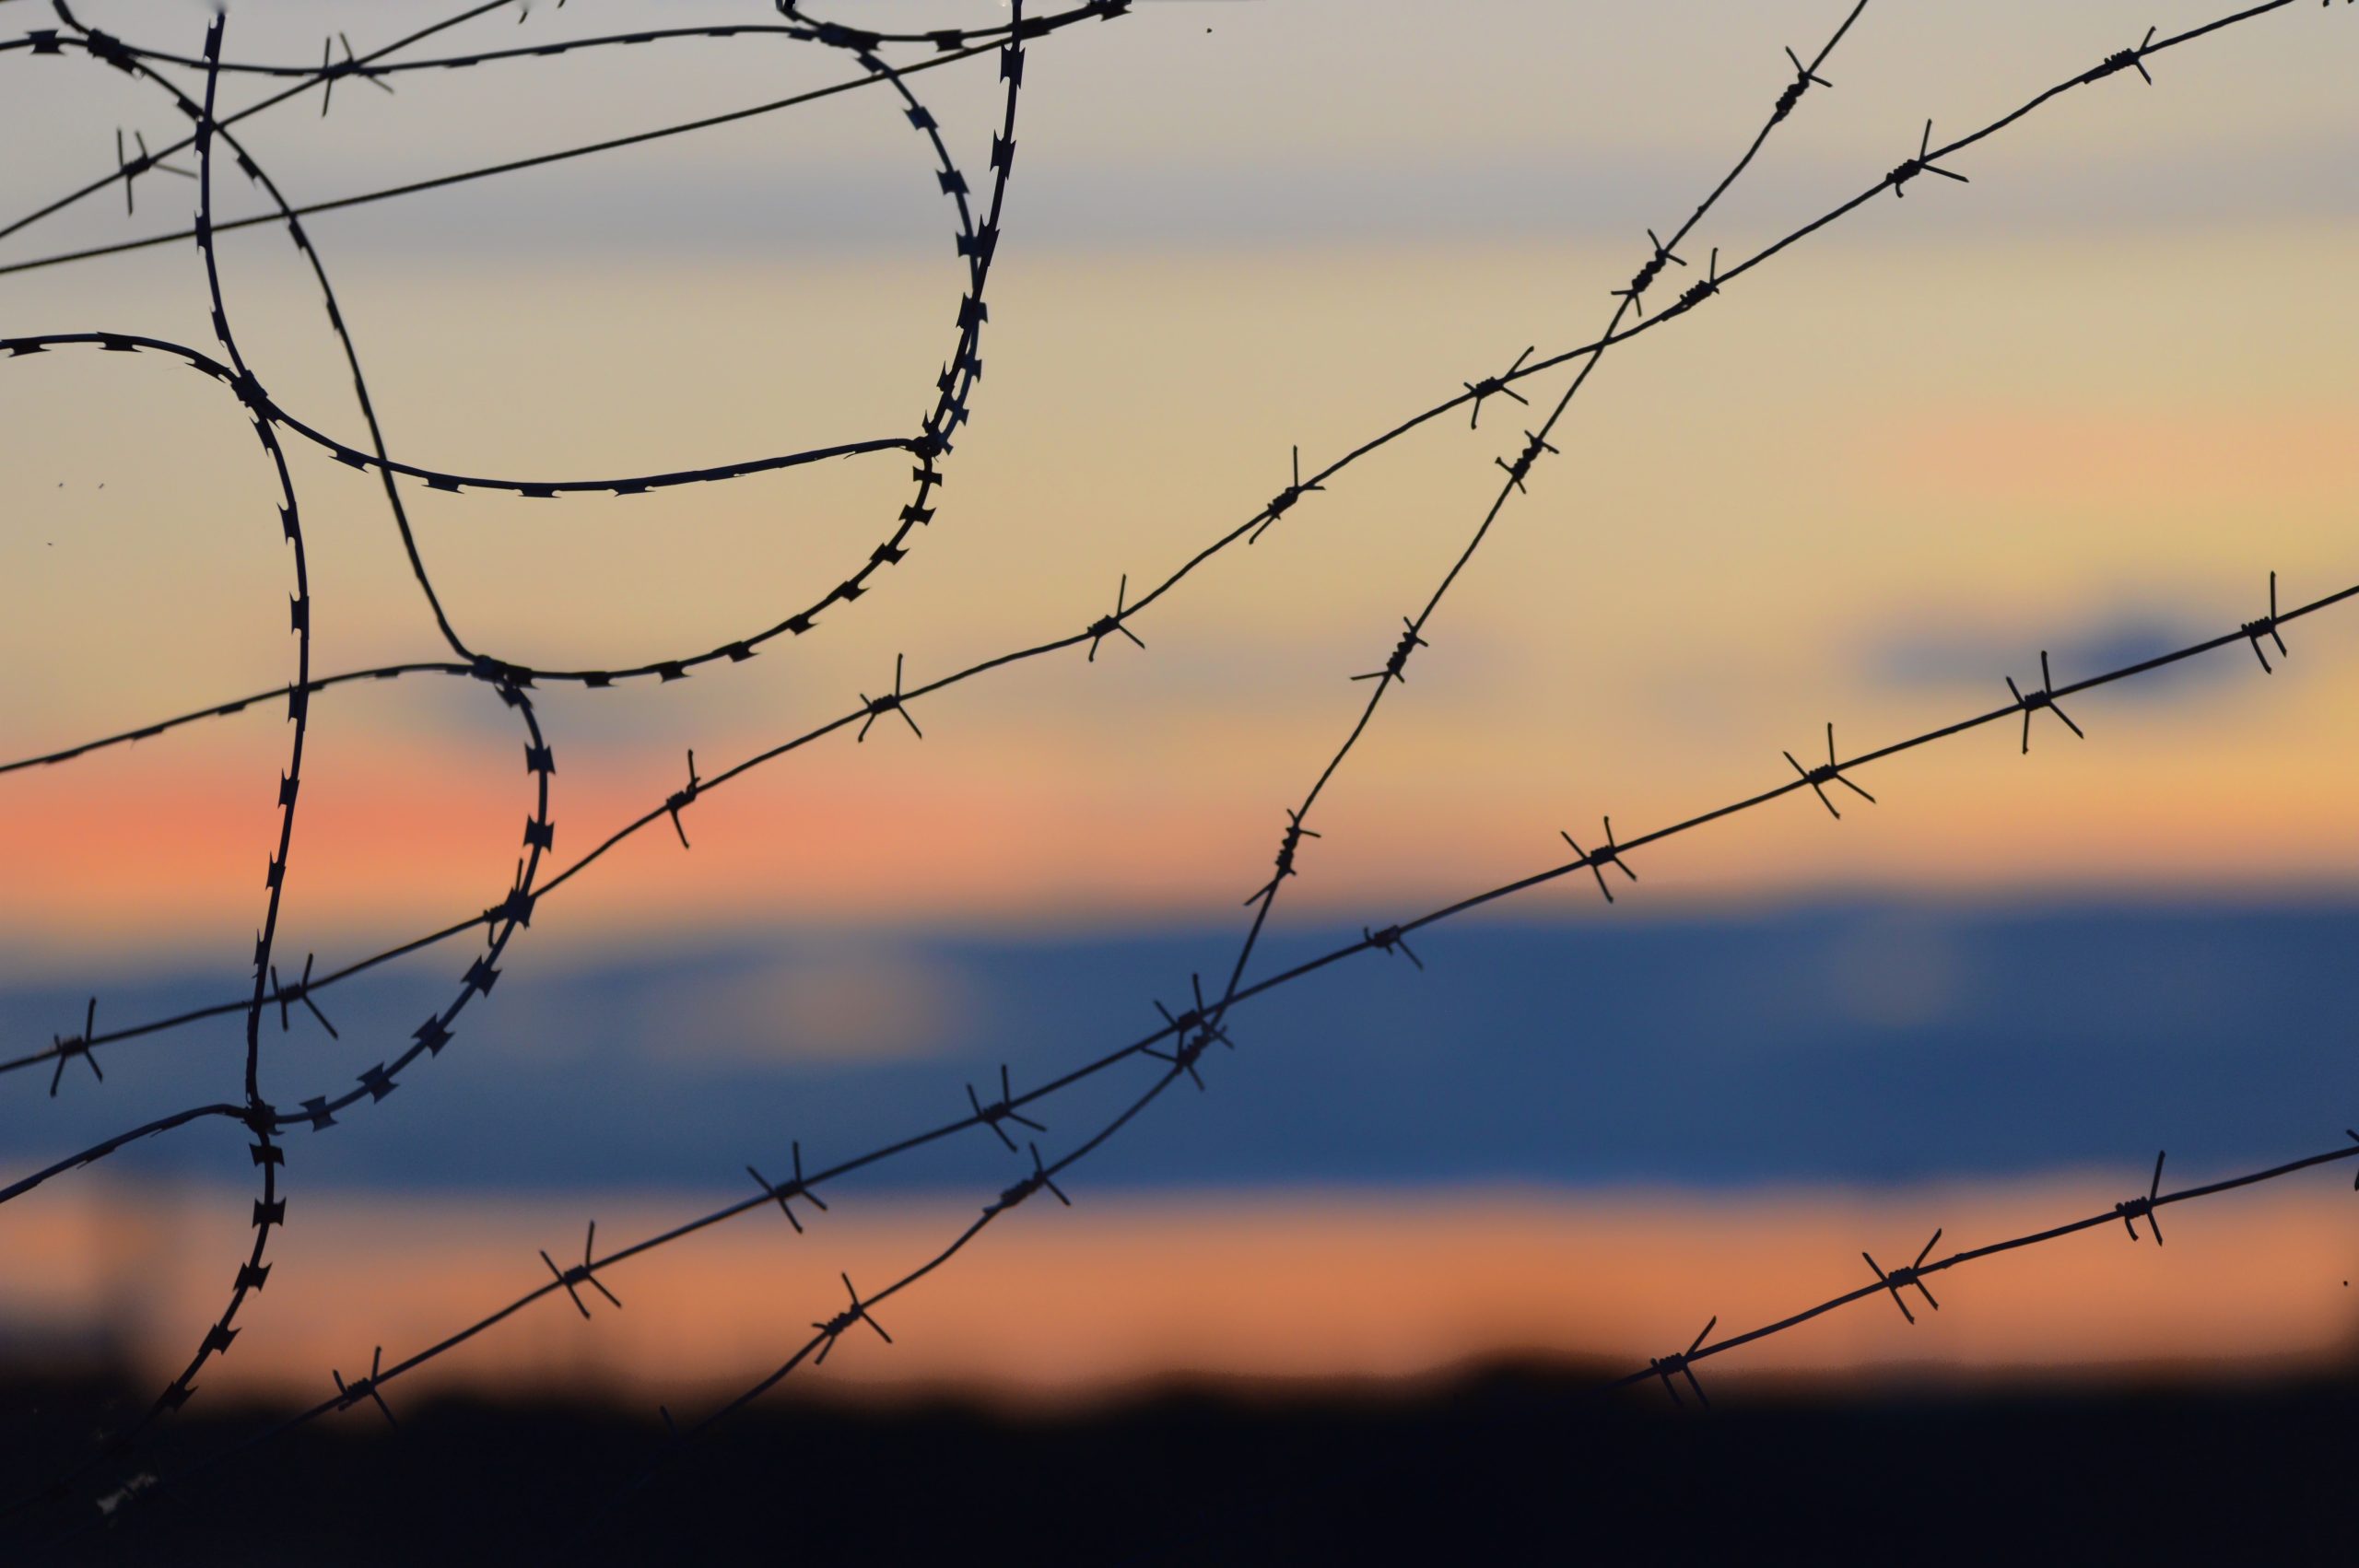 Barbed wire against a sunset